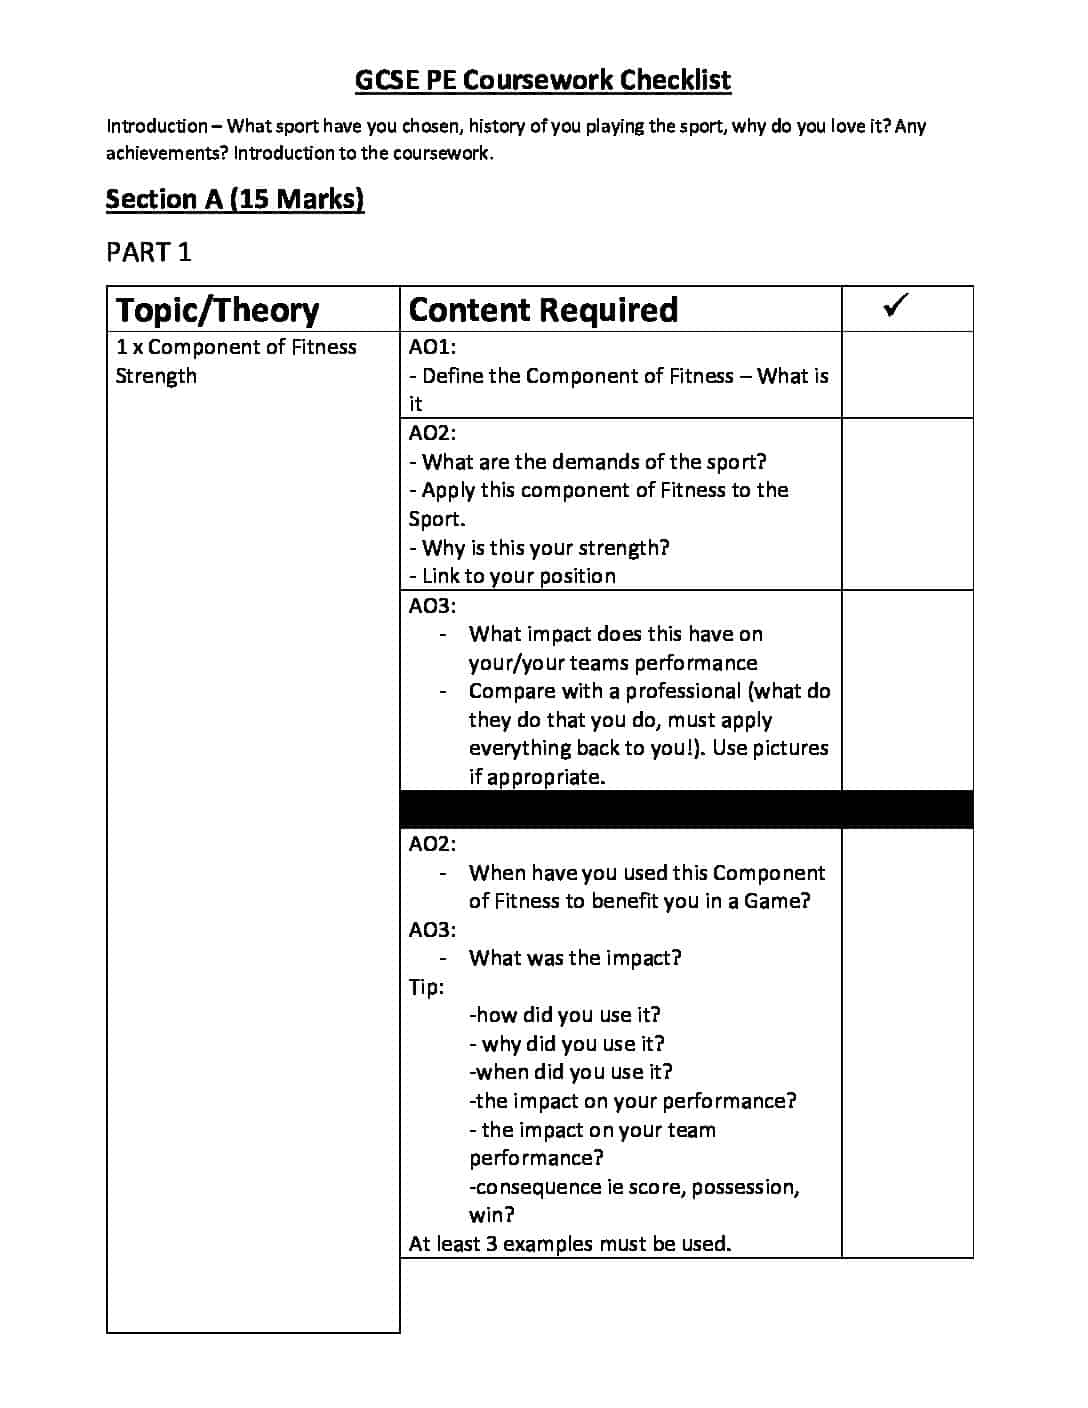 Featured image for “GCSE PE Coursework Checklists for Students”